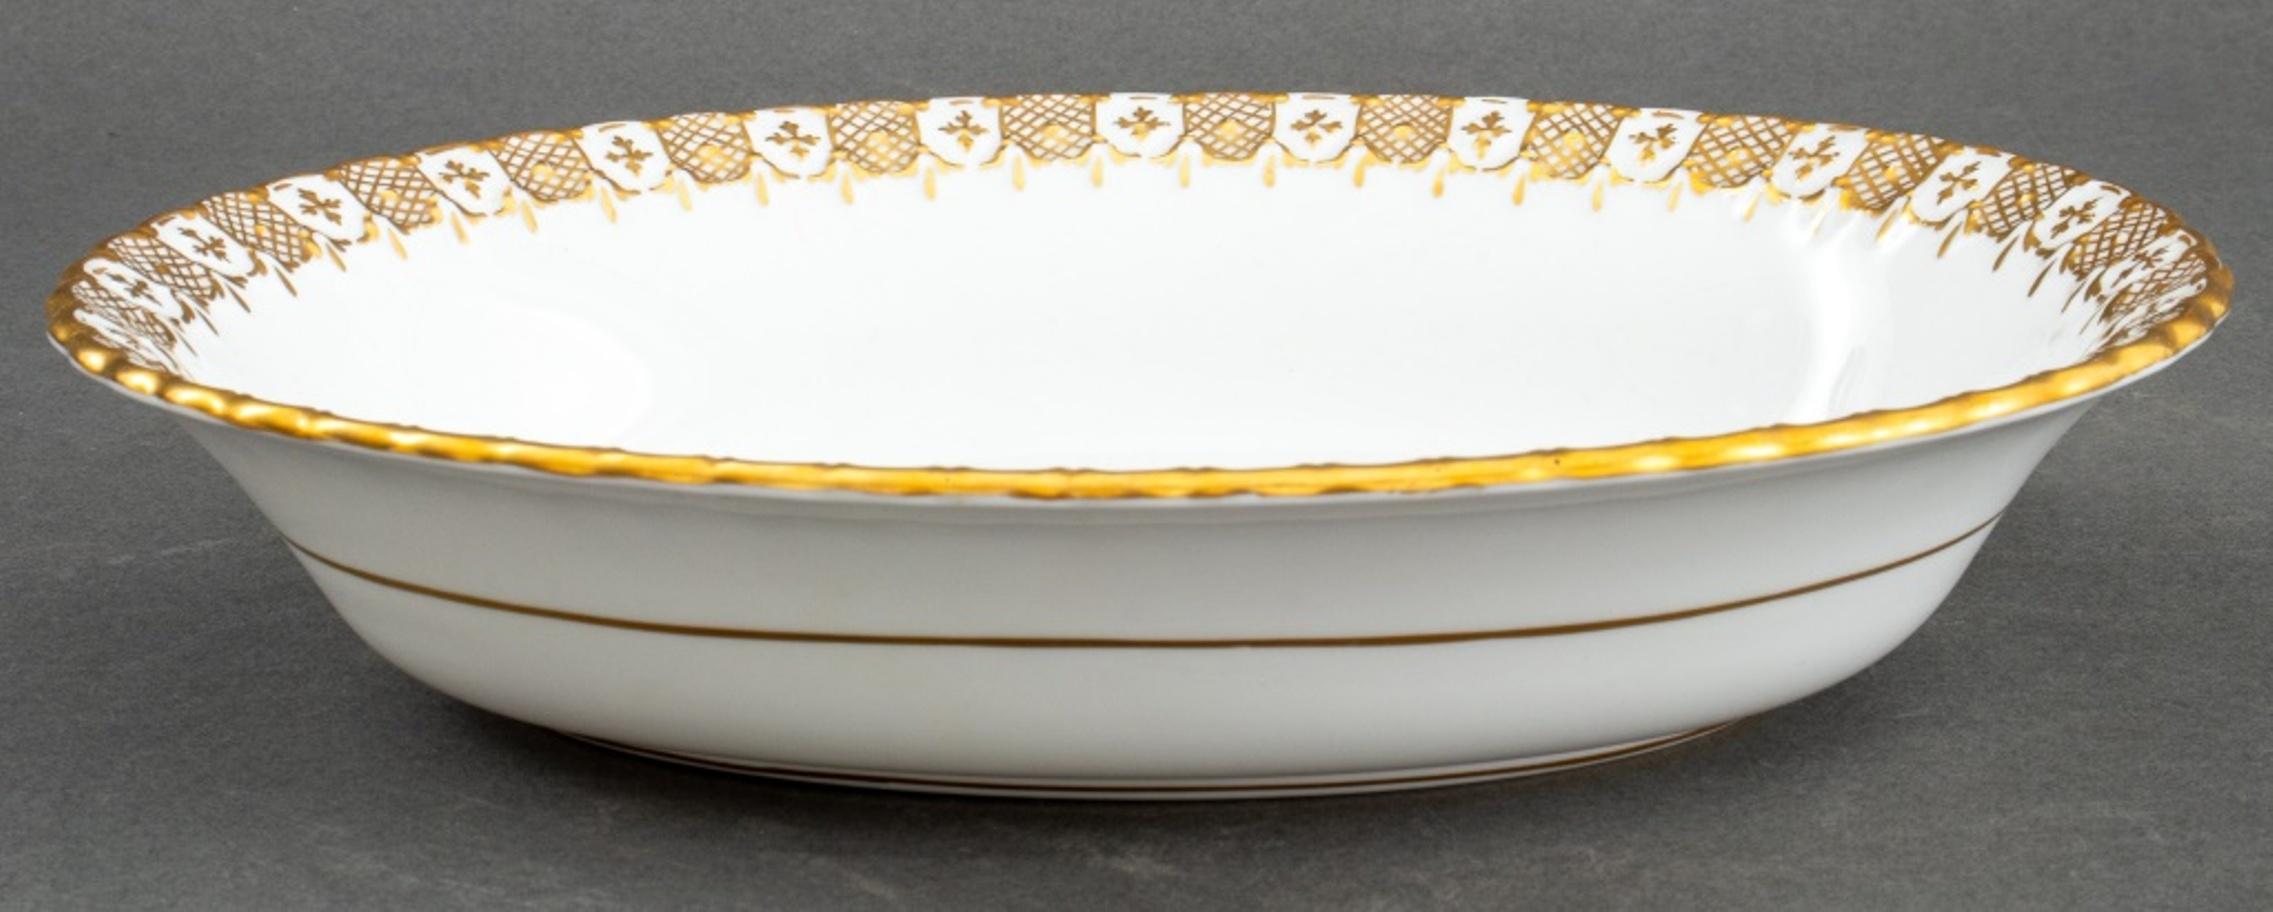 Royal Crown Derby bone china part dinner service for twelve (12), each with iron red overglaze marks for 1966, in the 